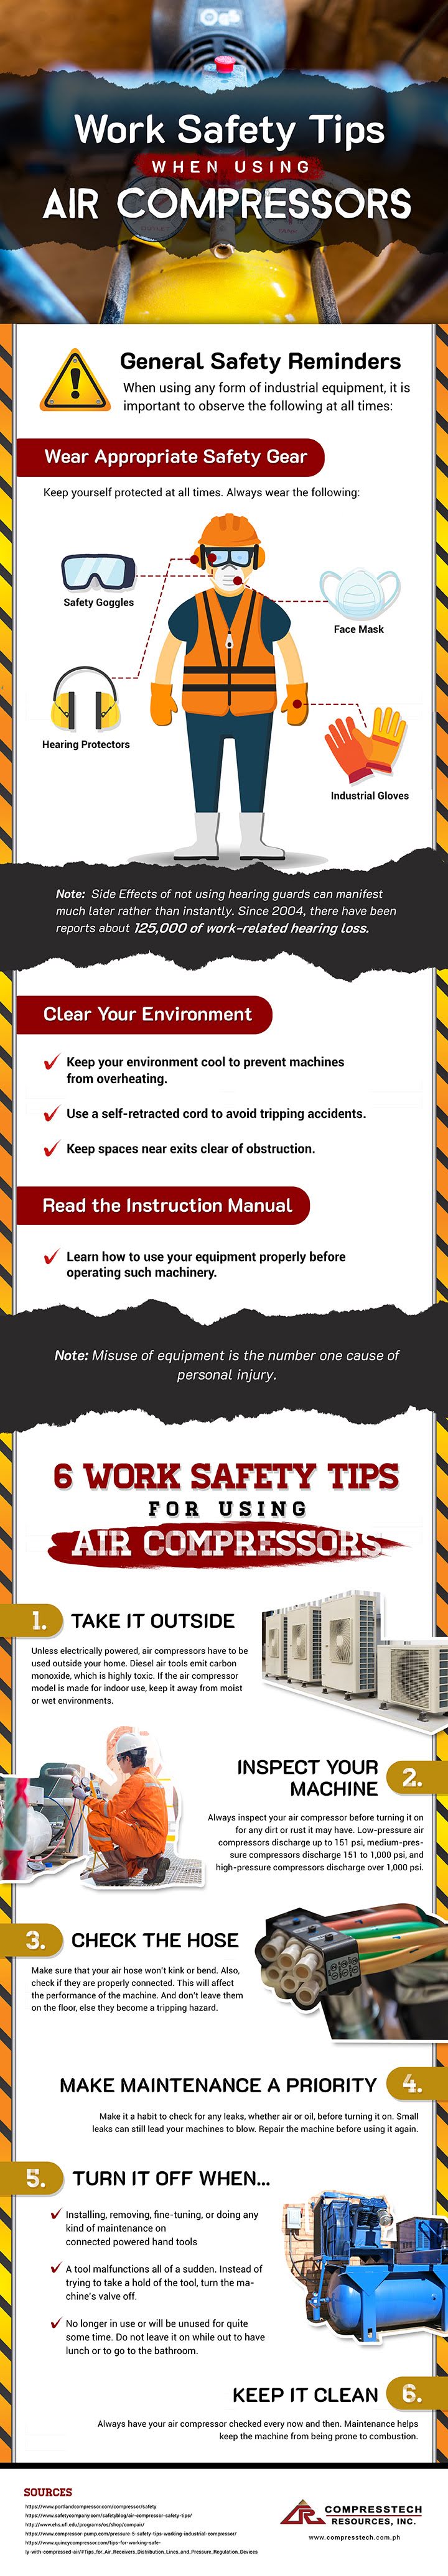 Work Safety Tips When Using Air Compressors #infographic